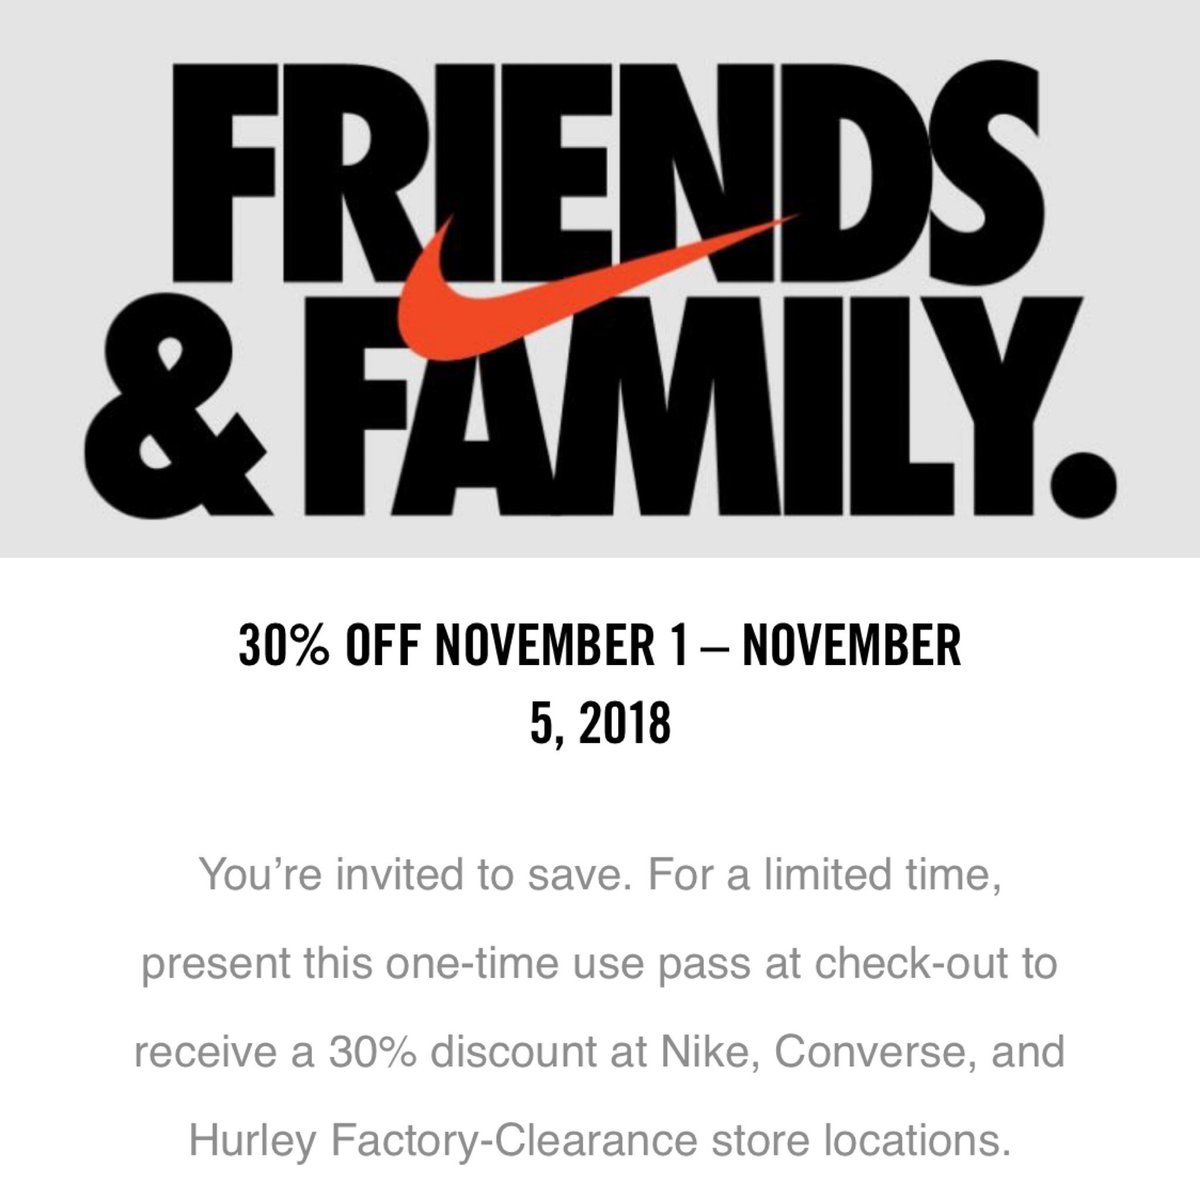 zeven duidelijk voelen J23 iPhone App on Twitter: "Check Nike+ email/app for 30% OFF Friends and  Family at Nike Outlets 11/1 - 11/5 https://t.co/1WRzqWBi9g" / Twitter